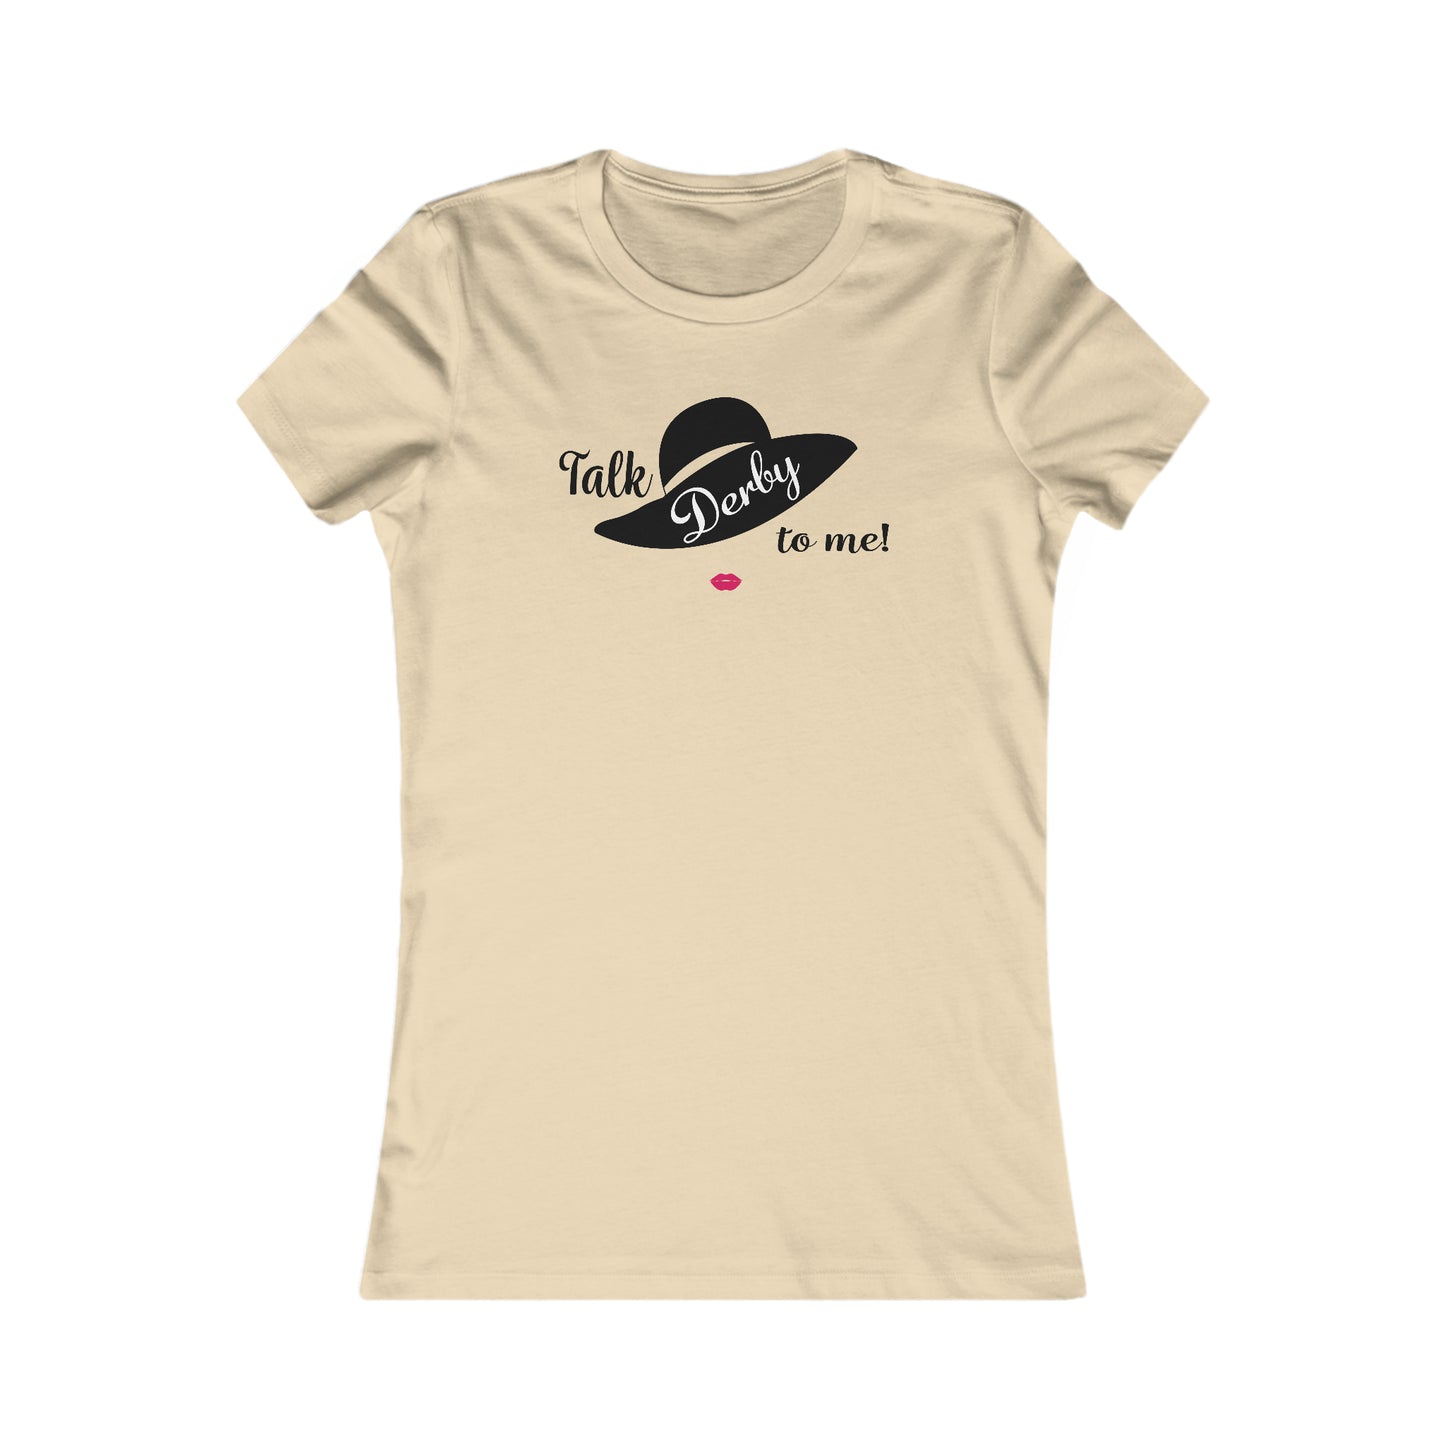 Talk Derby To Me T-Shirt For Derby Day T Shirt For Kentucky Derby TShirt